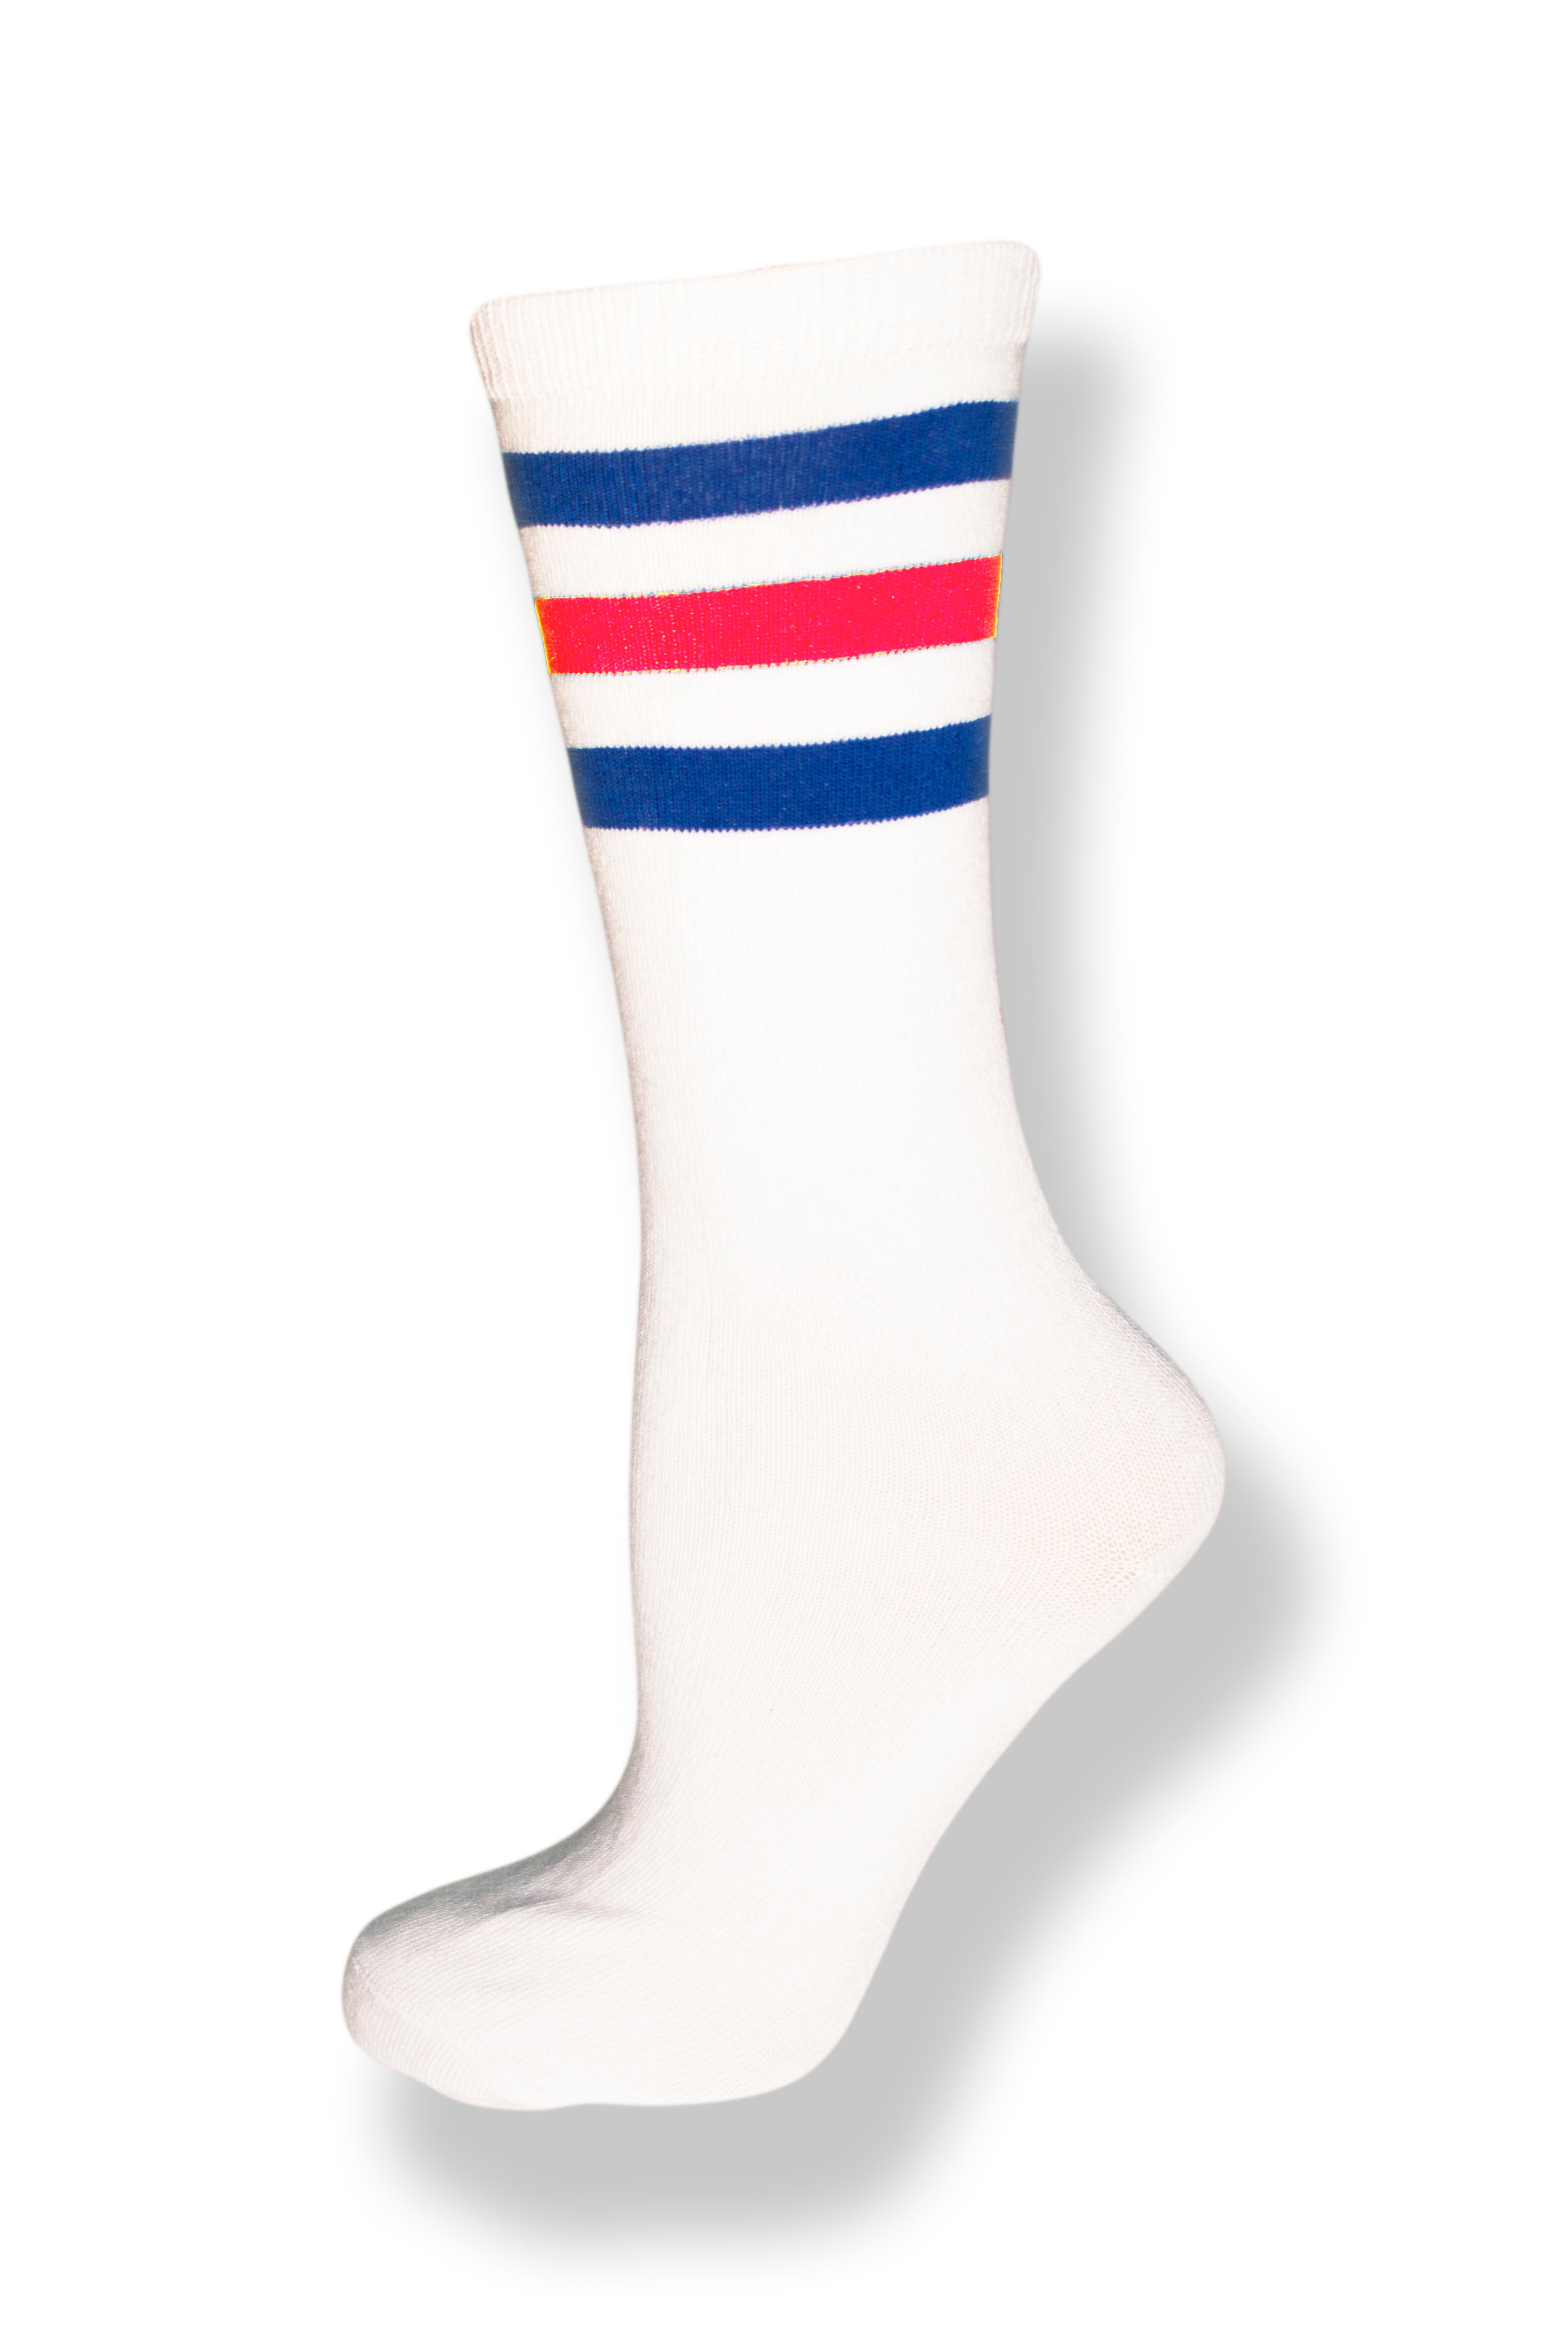 Calf high crew cut white sock with three royal blue and red stripes